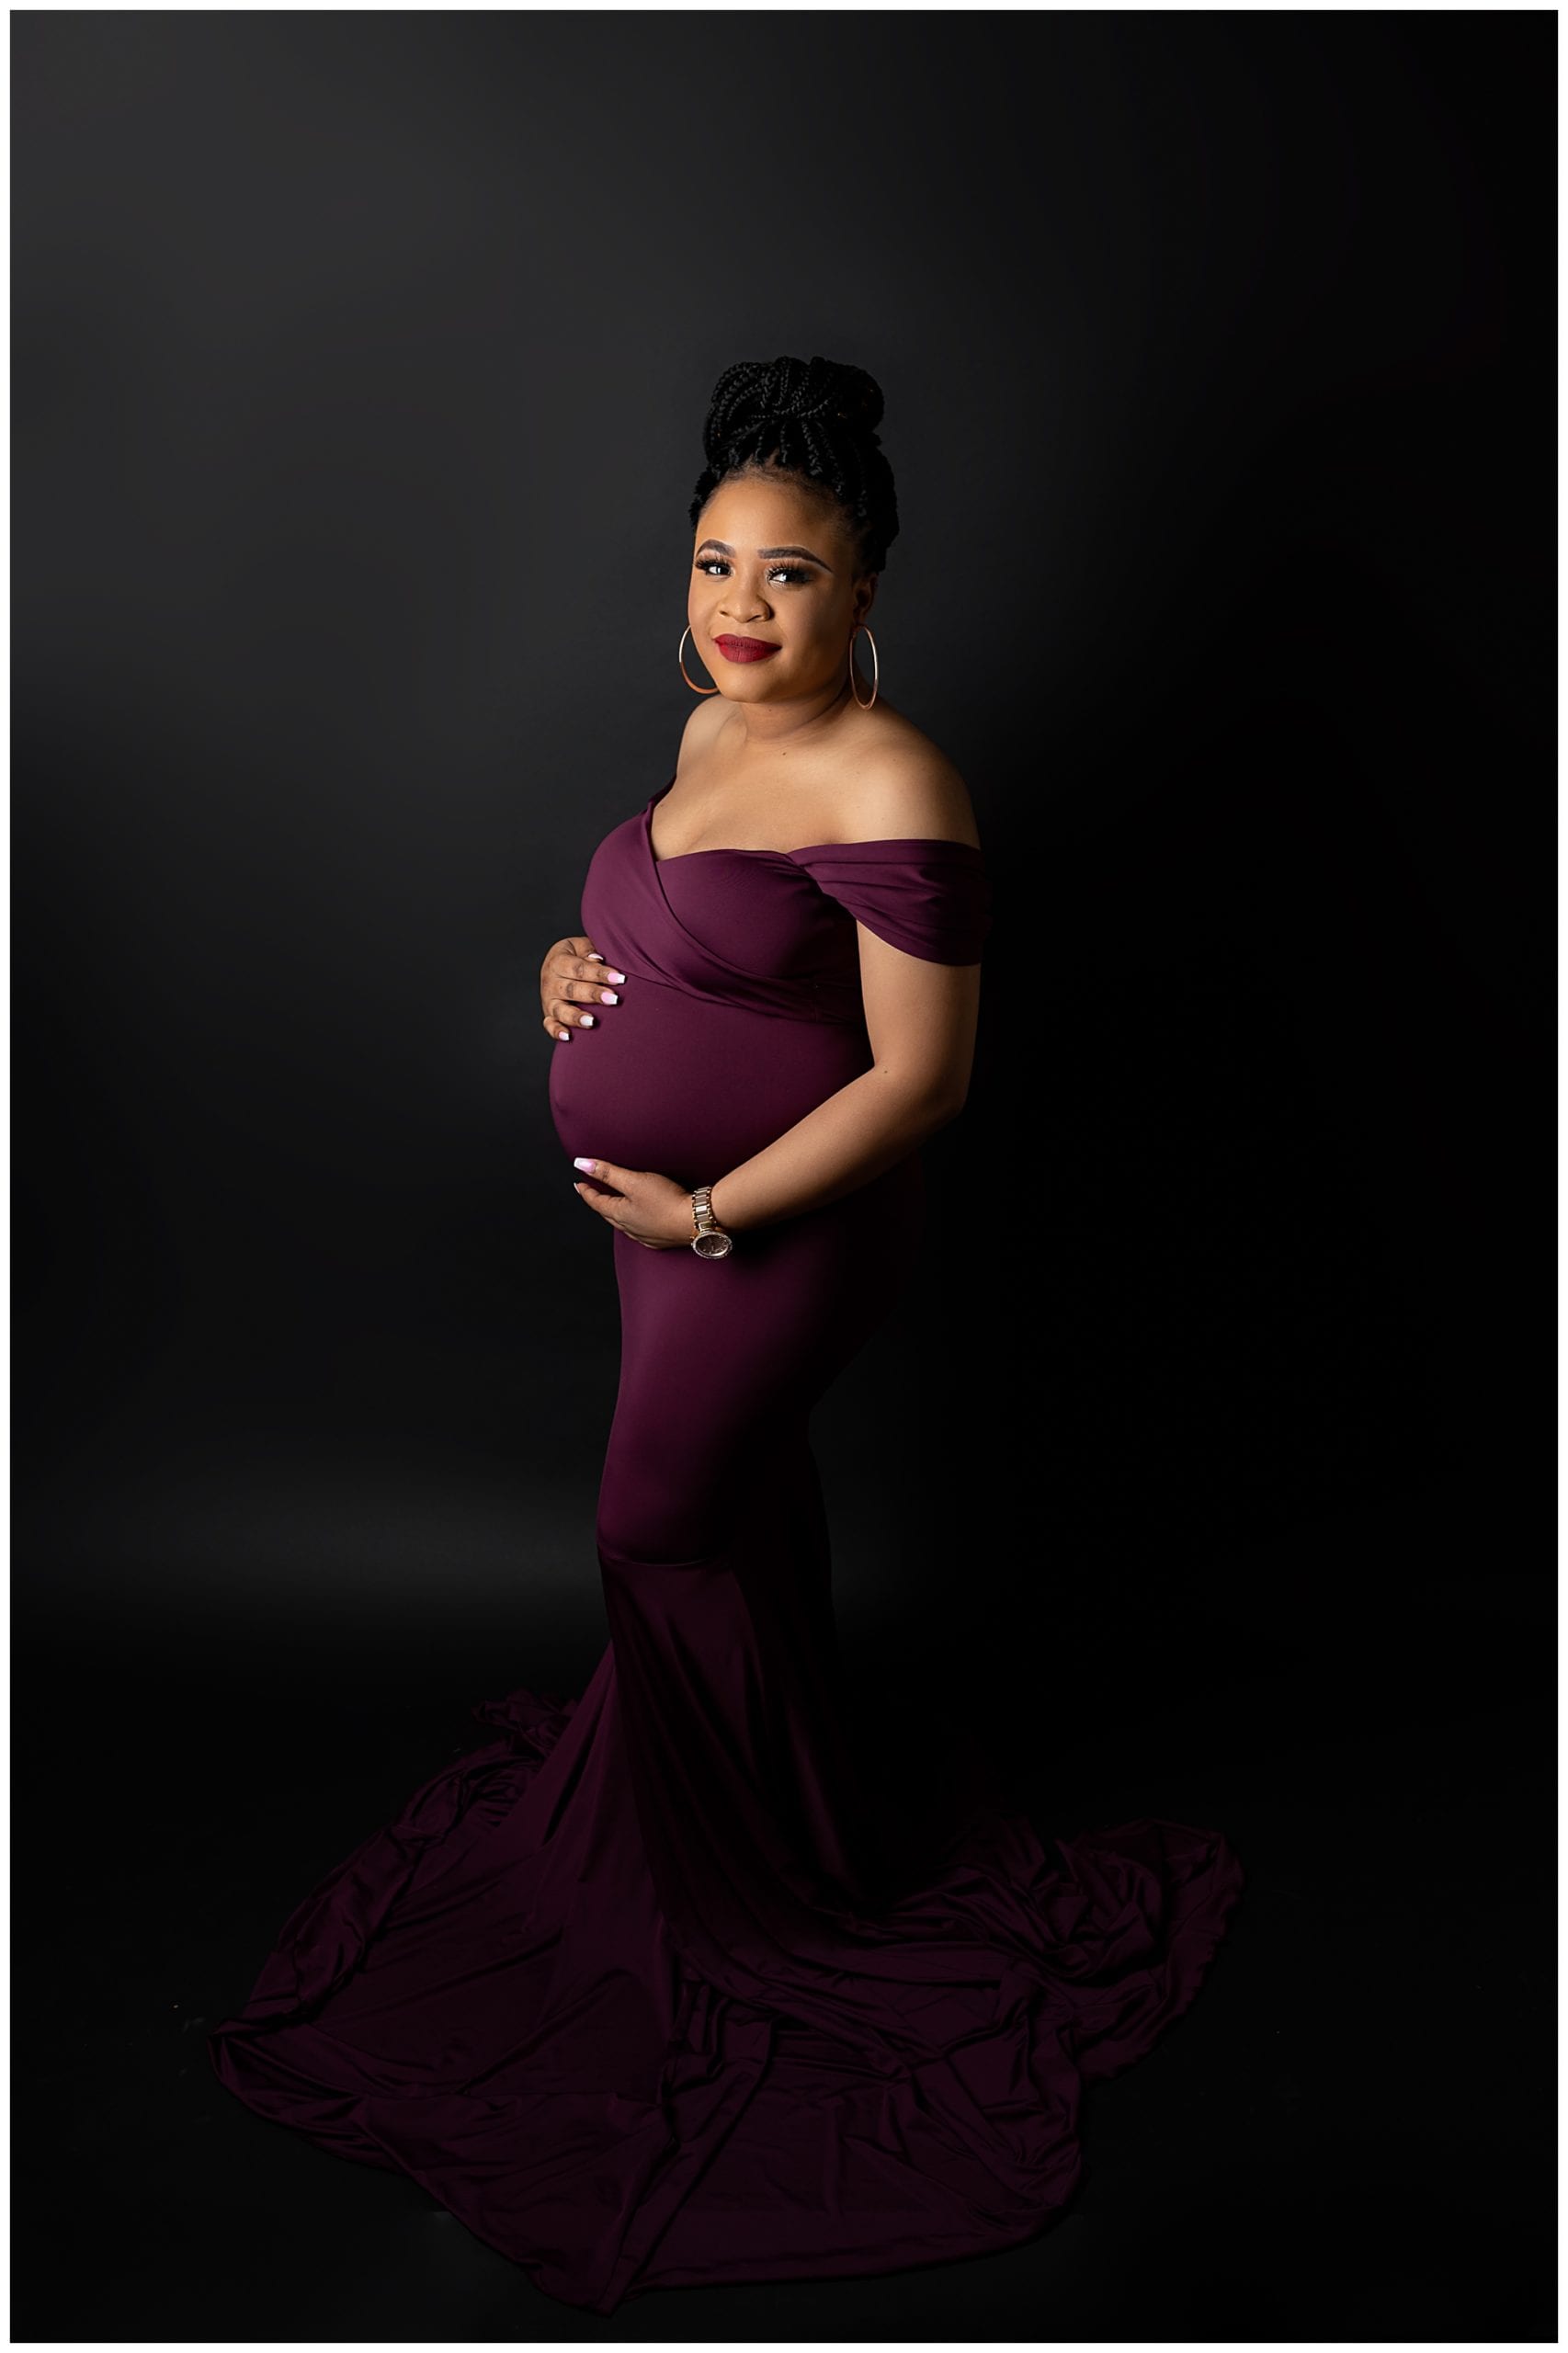 pregnant woman wearing a purple dress holding her belly